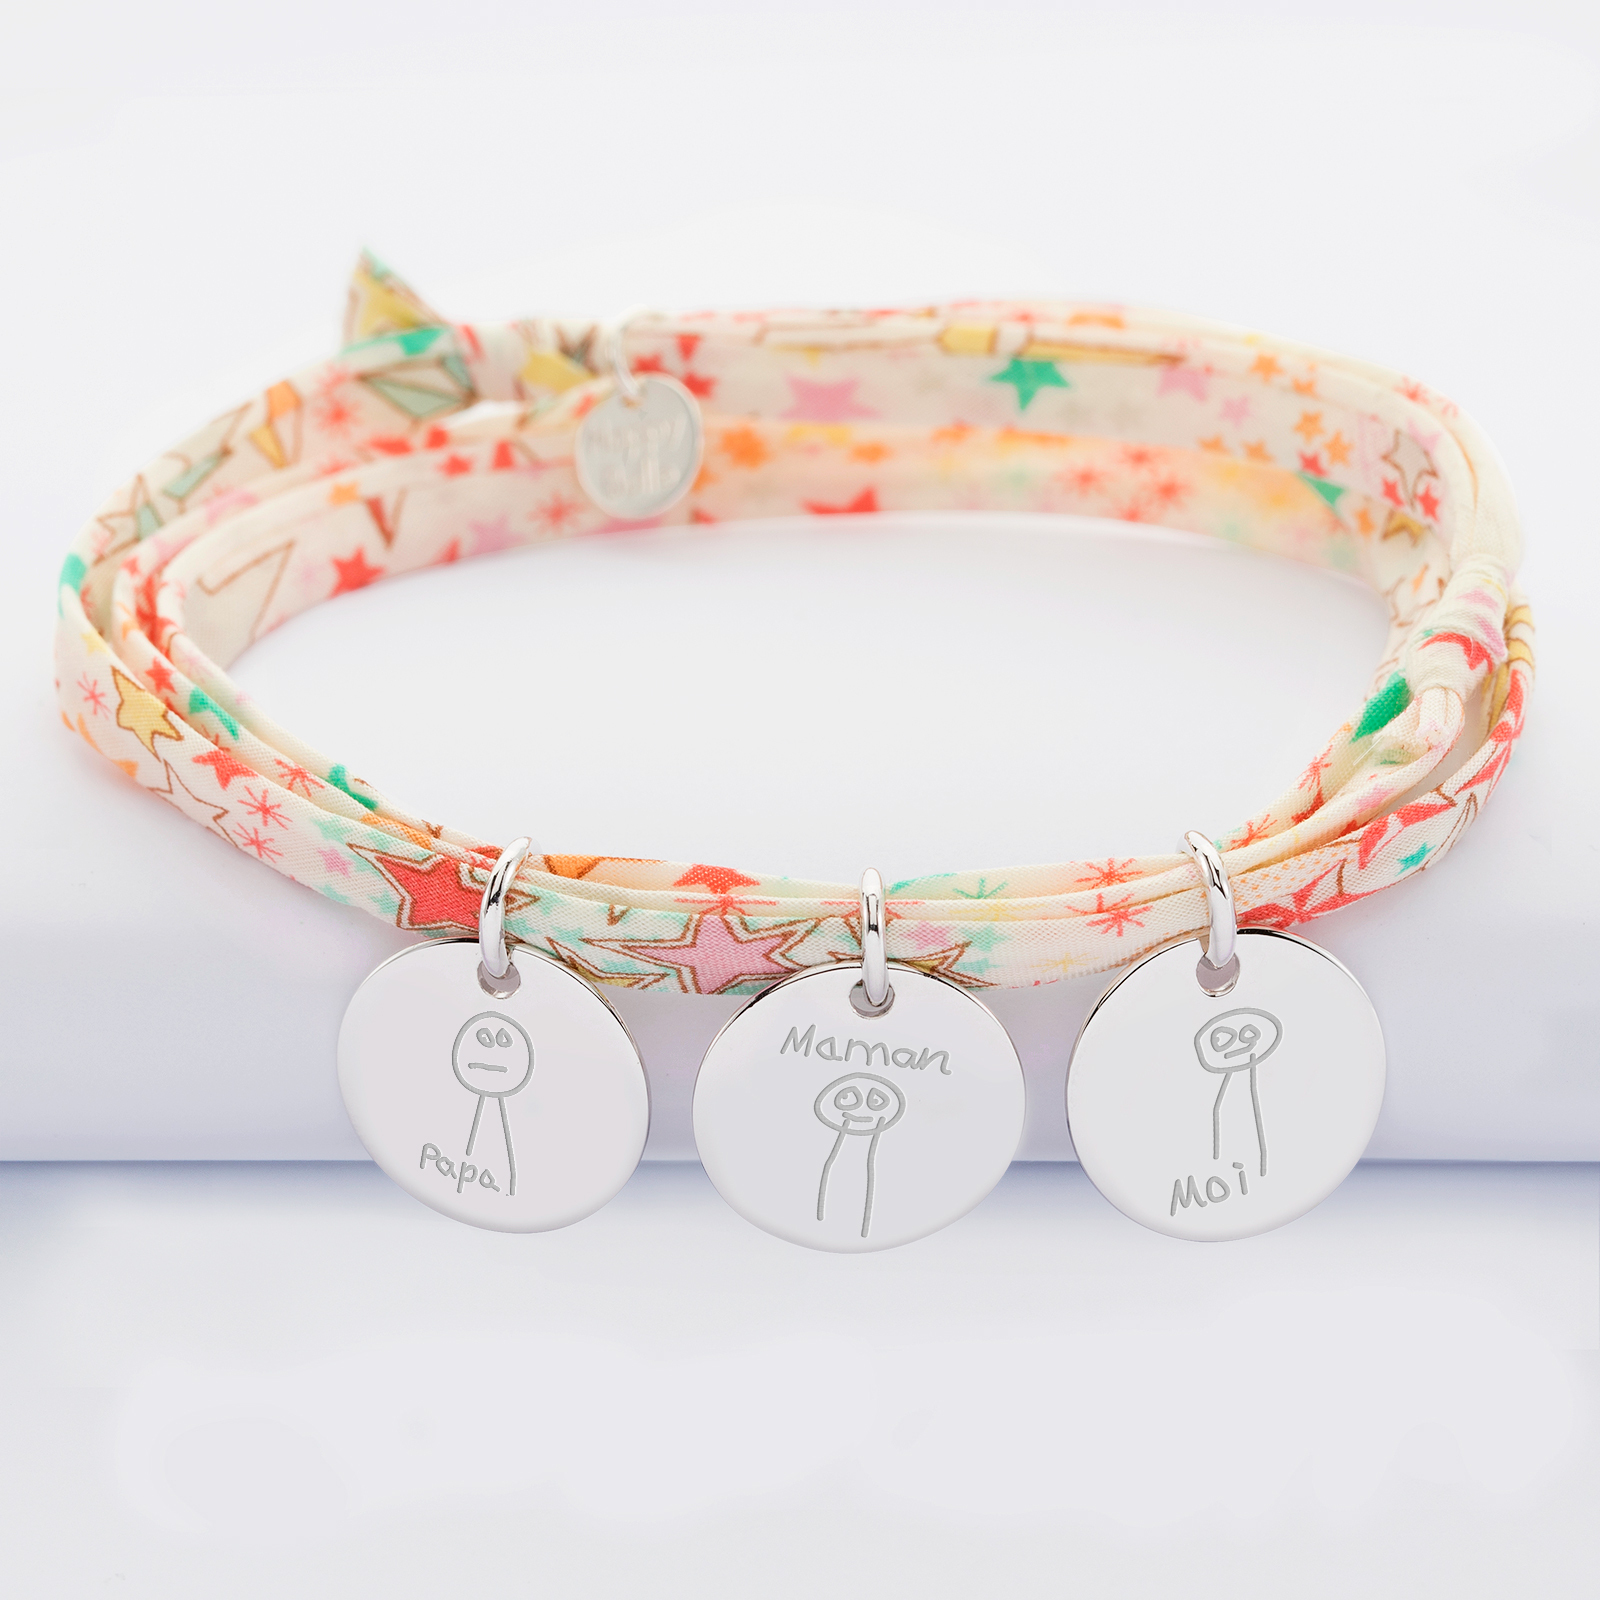 Liberty 3 turn bracelet with 3 personalised engraved silver medallions 15 mm - sketches